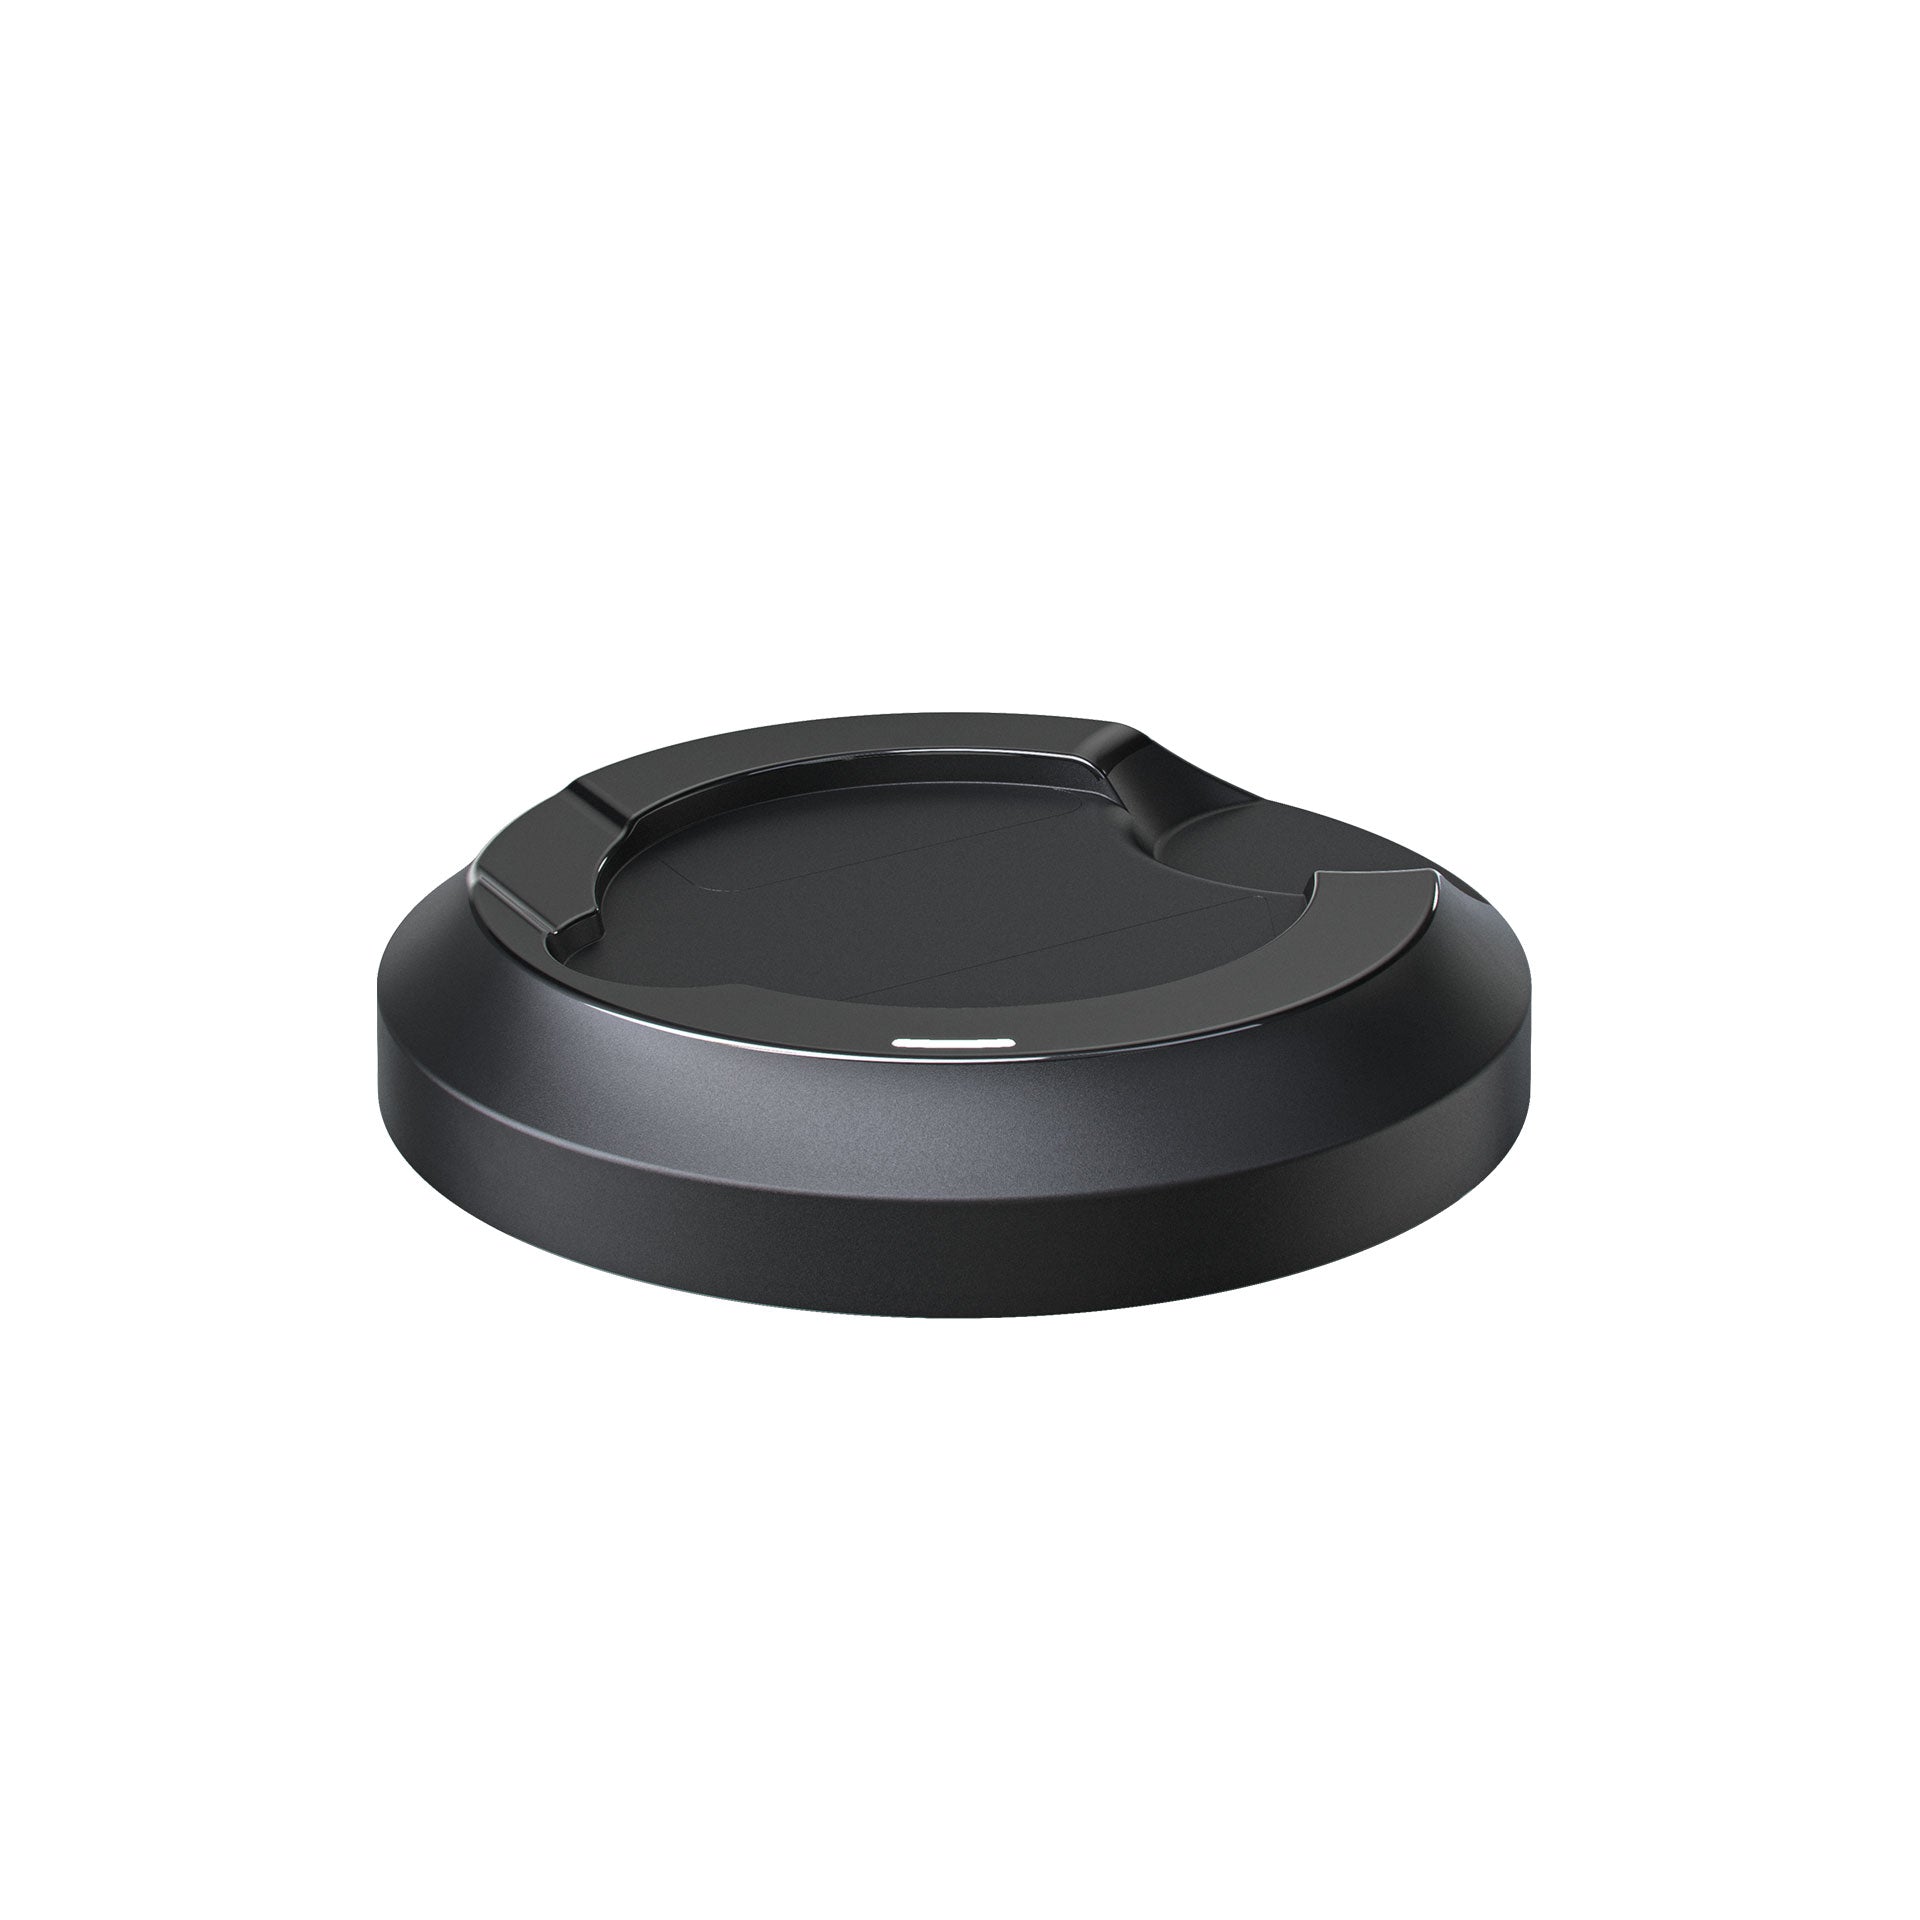 Multi-Device Wireless Charger, Theragun